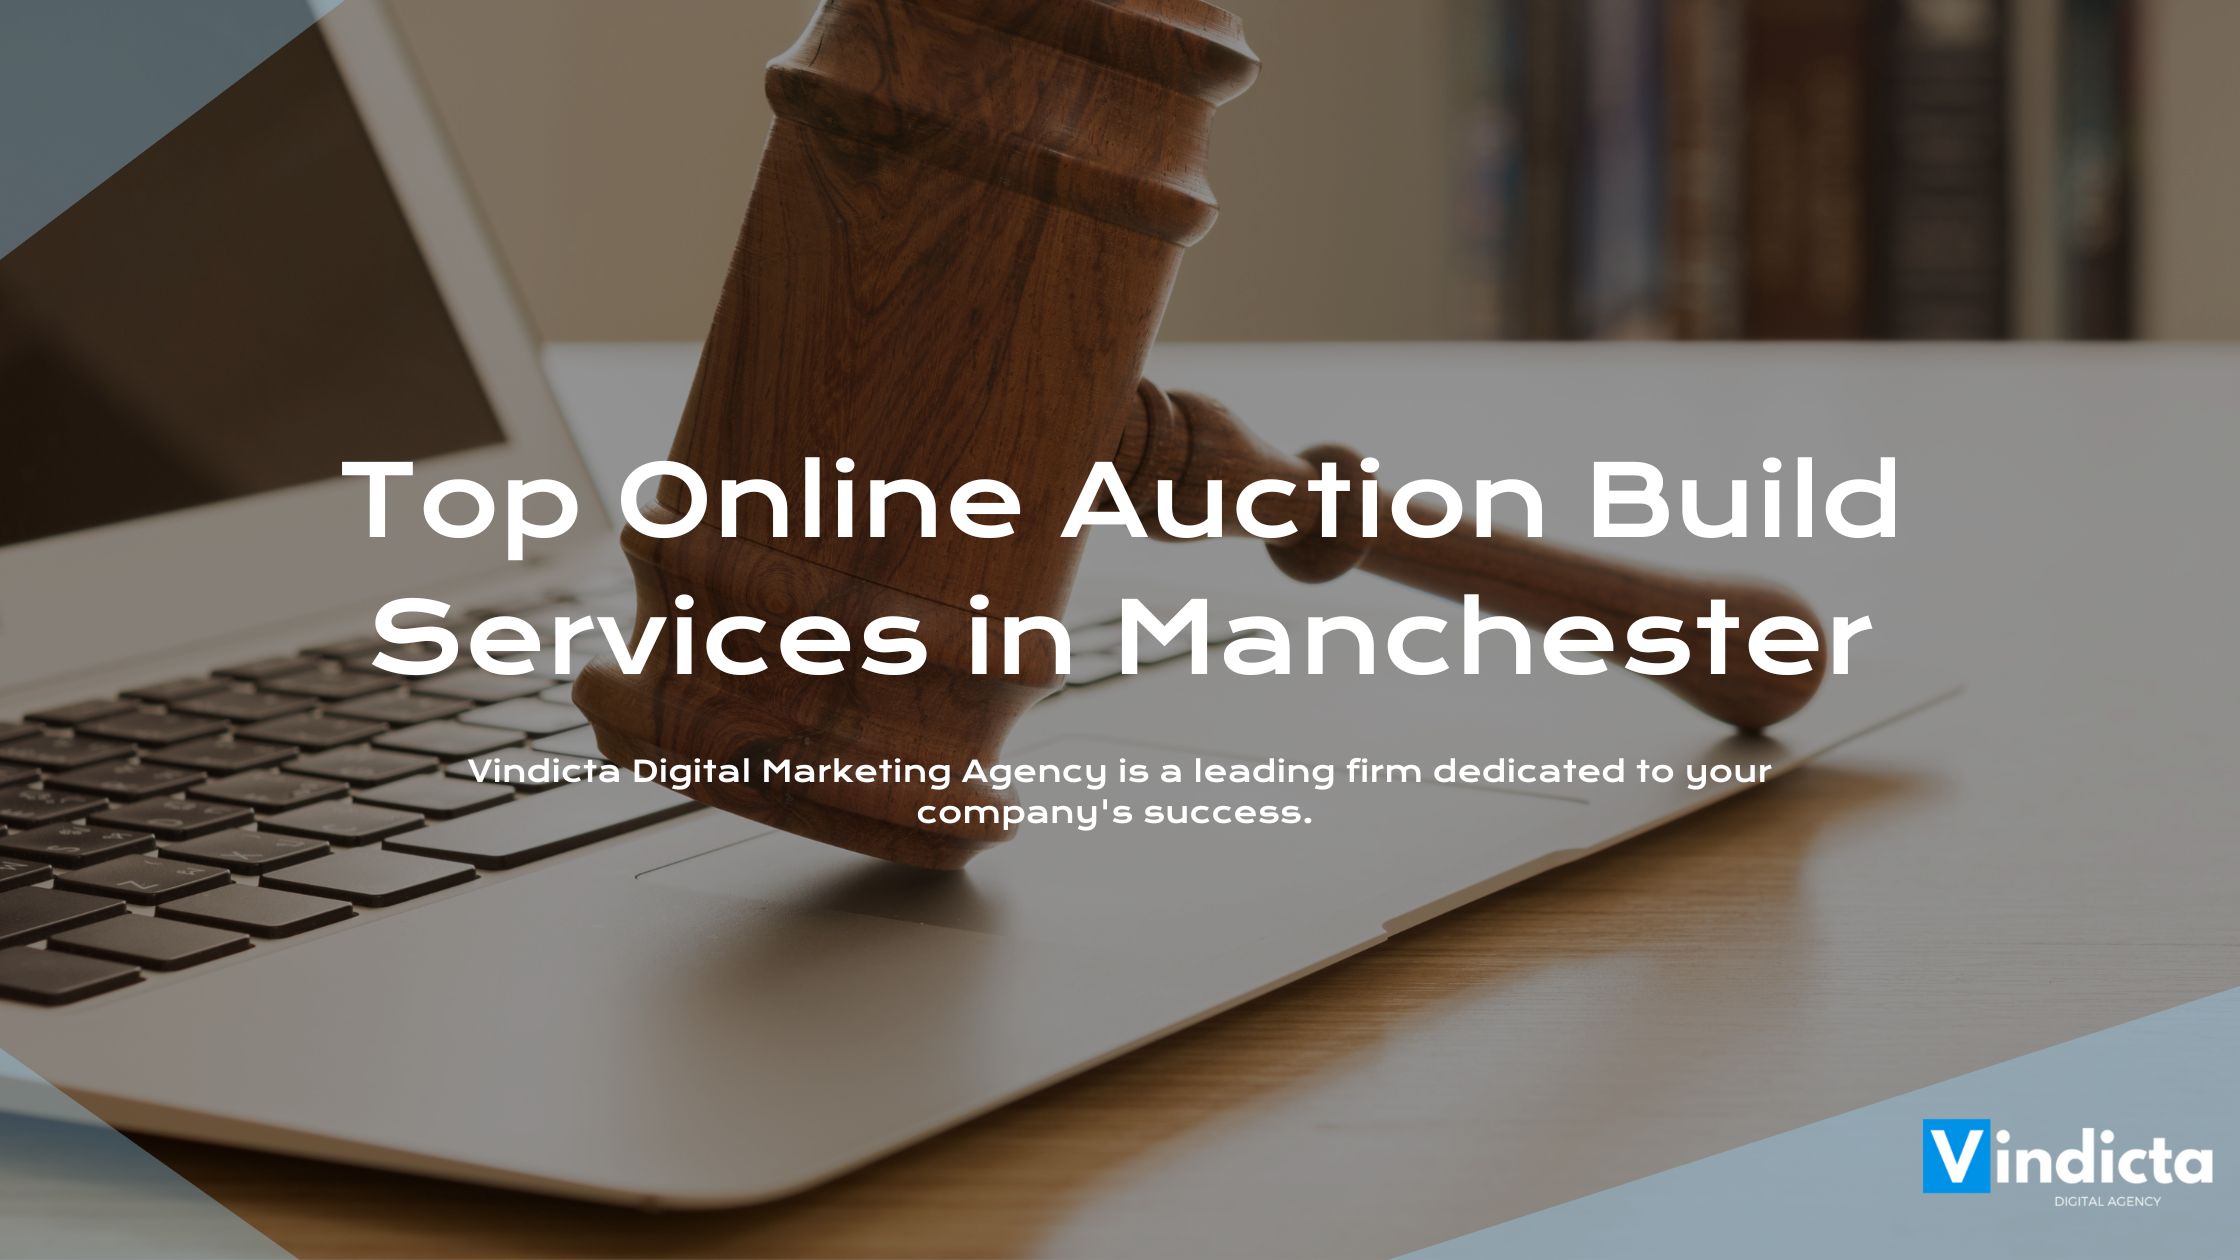 Top Online Auction Build Services in Manchester